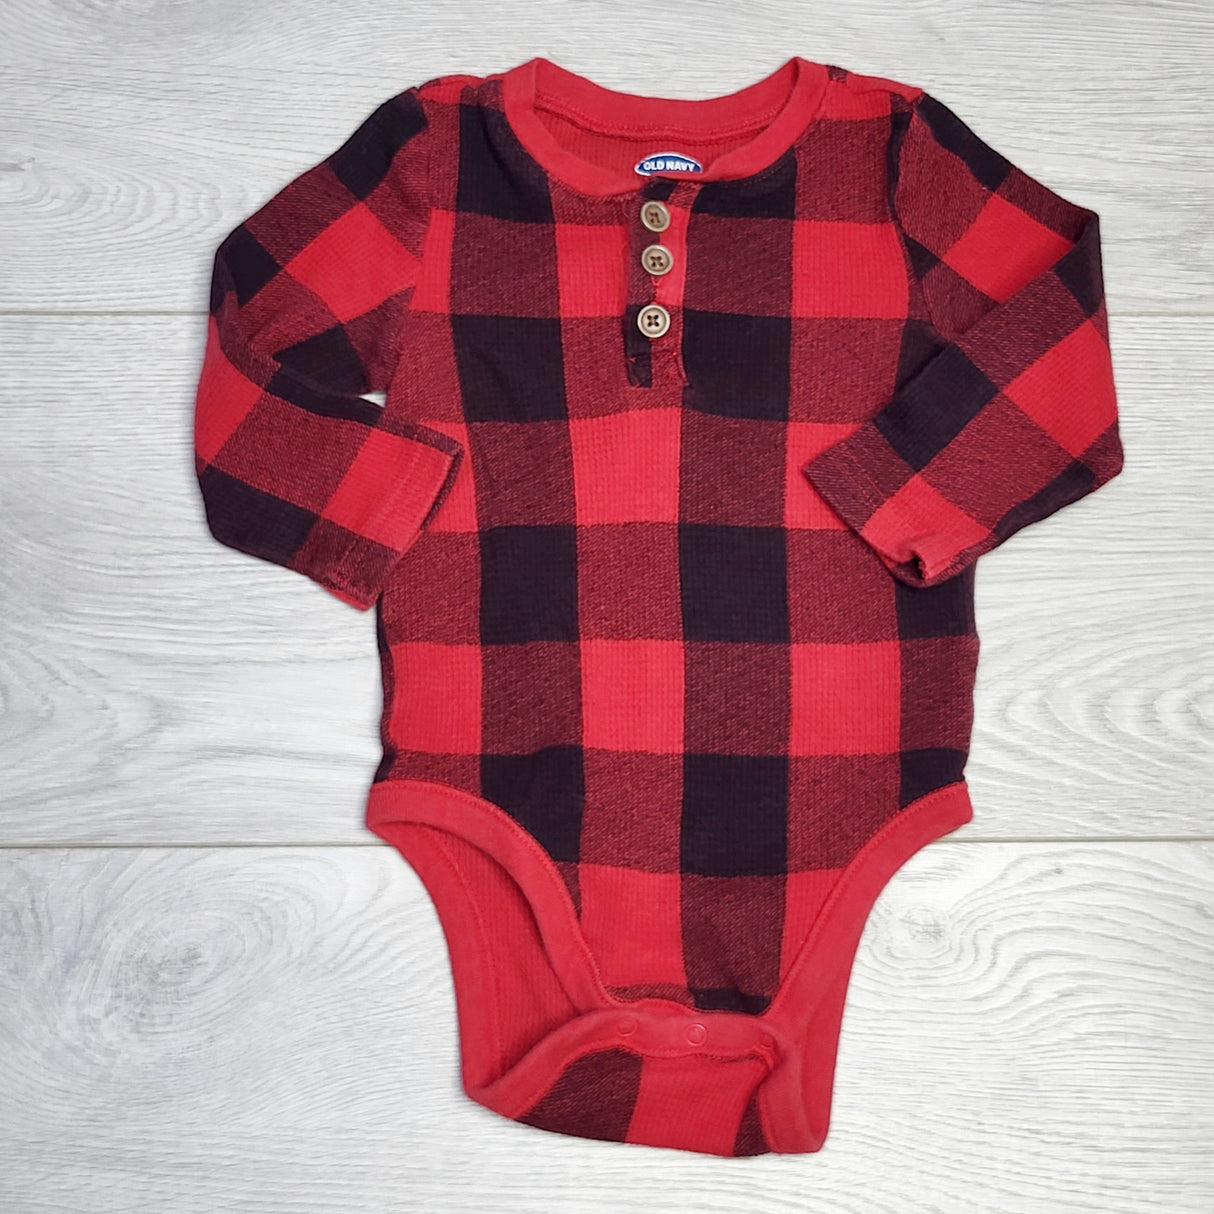 CRTH1 - Old Navy buffalo plaid waffle knit bodysuit. Size 6-12 months